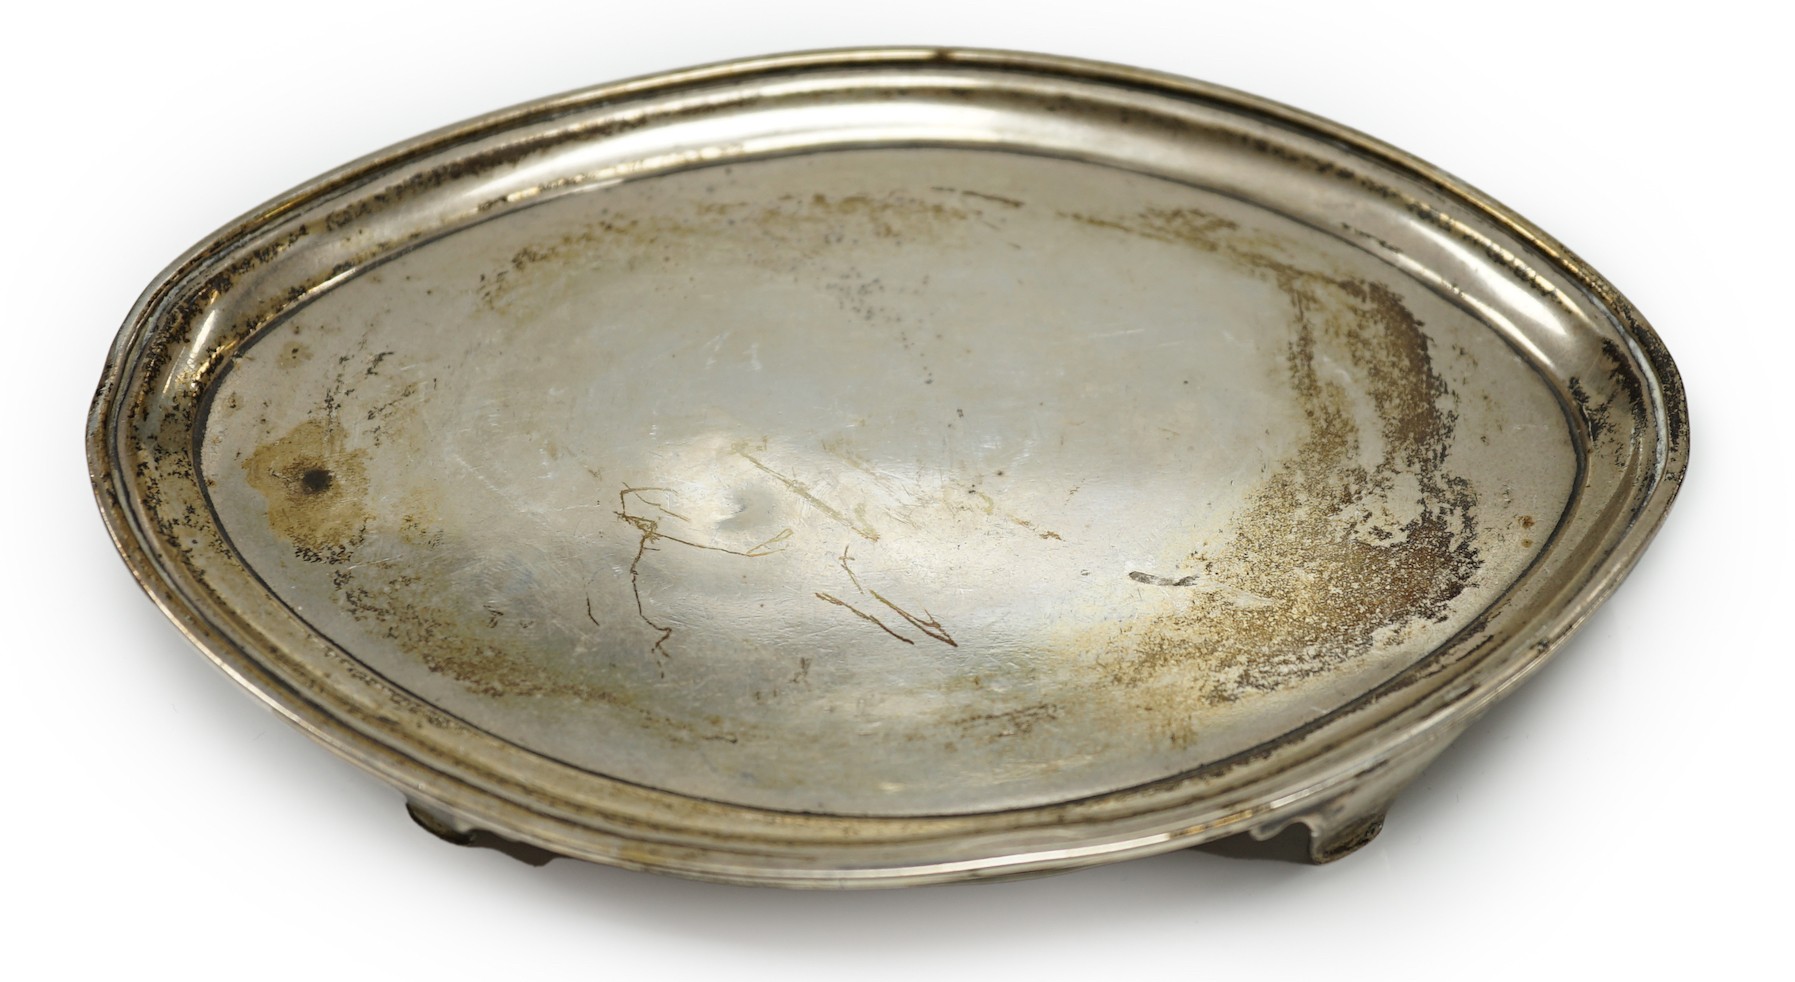 A George III silver oval teapot stand, Andrew Fogelberg, London, 1793, 17.2cm, 4.3oz.                                                                                                                                       